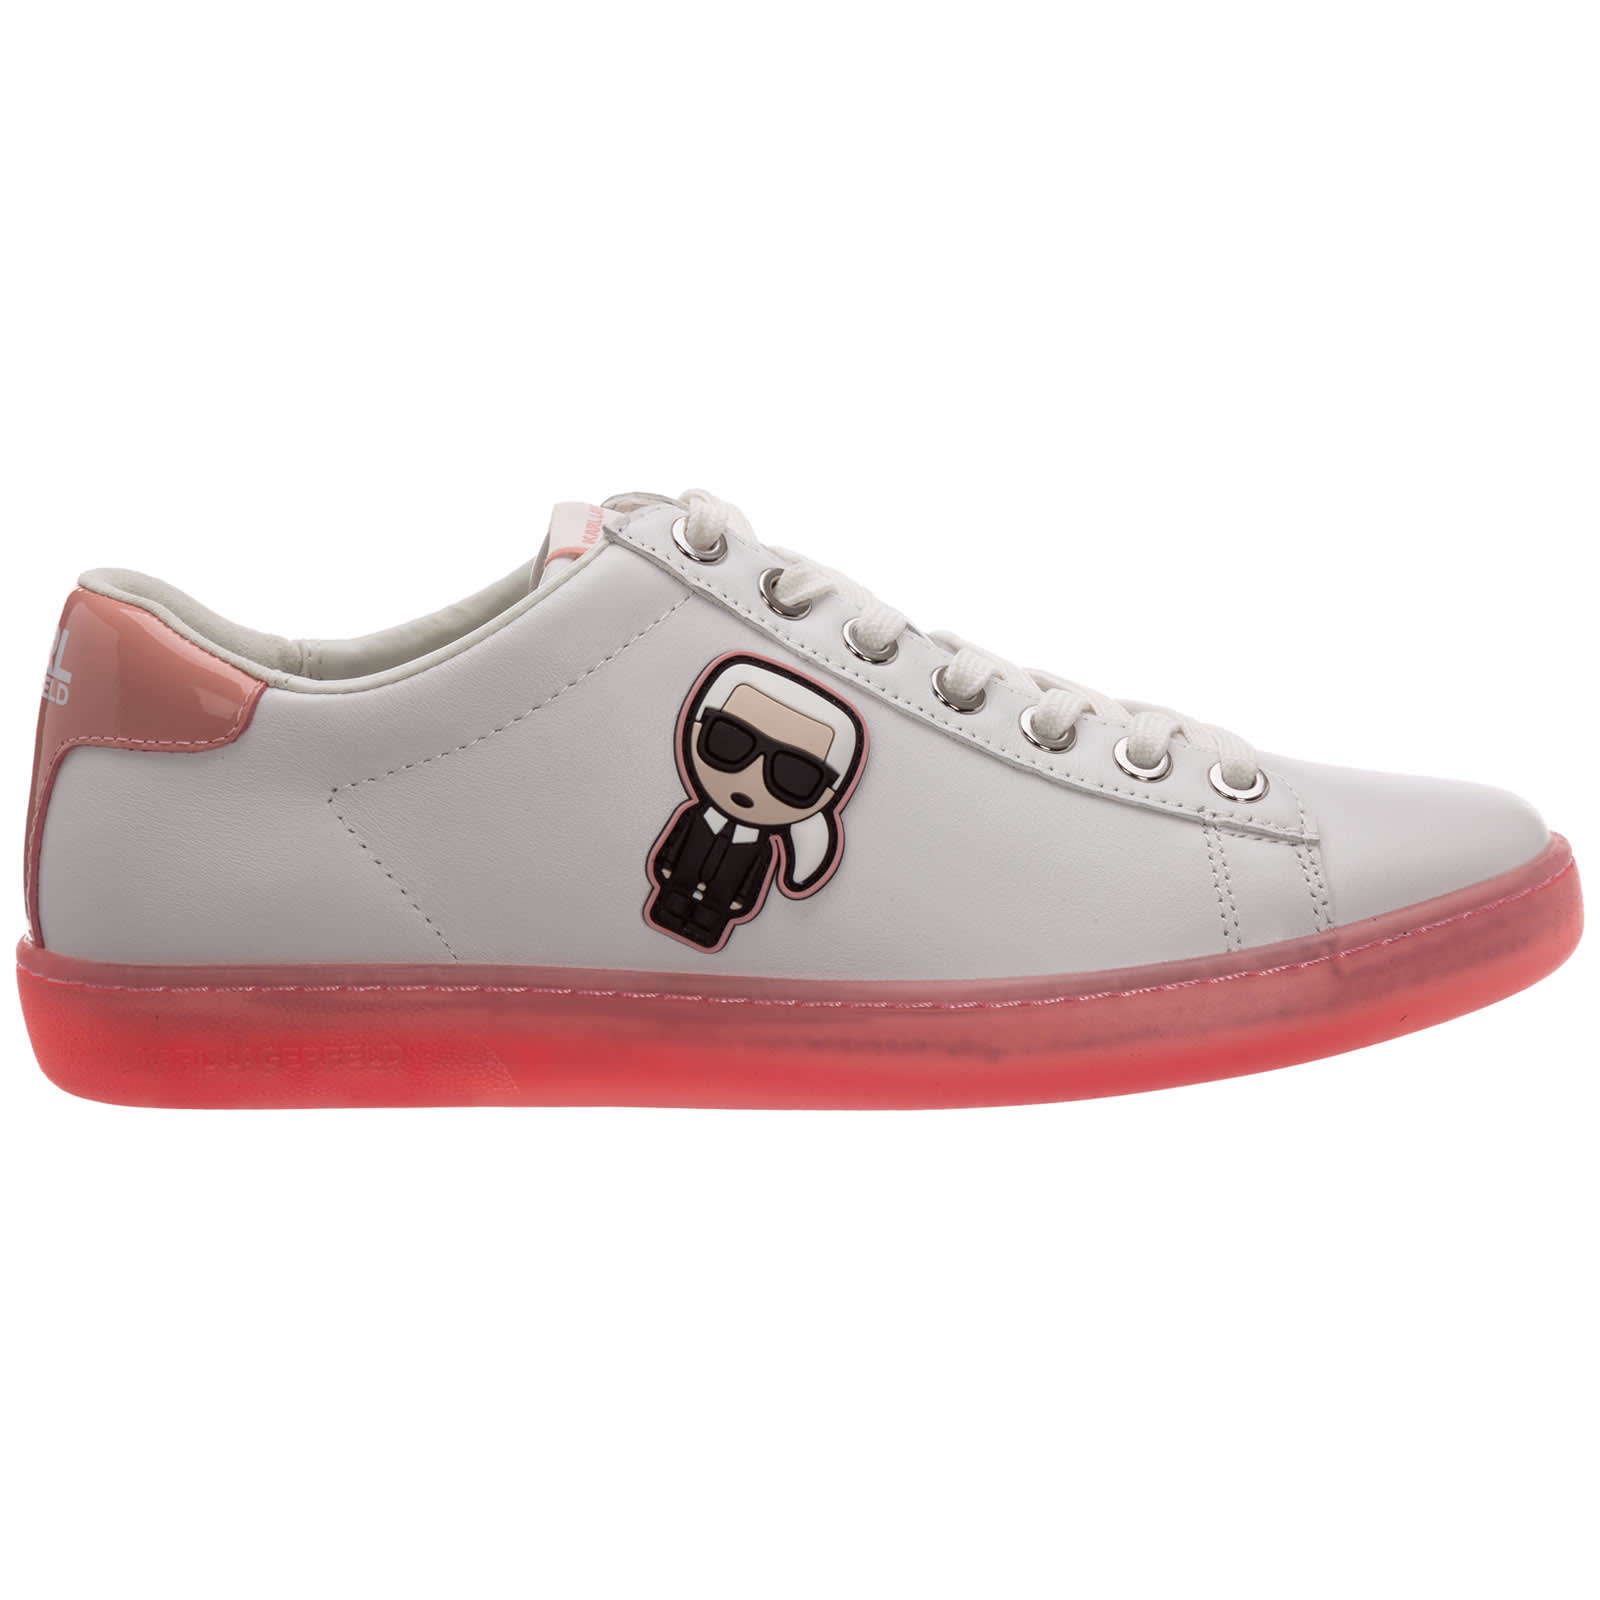 Buy Karl Lagerfeld Kupsole Ii Sneakers online, shop Karl Lagerfeld shoes with free shipping